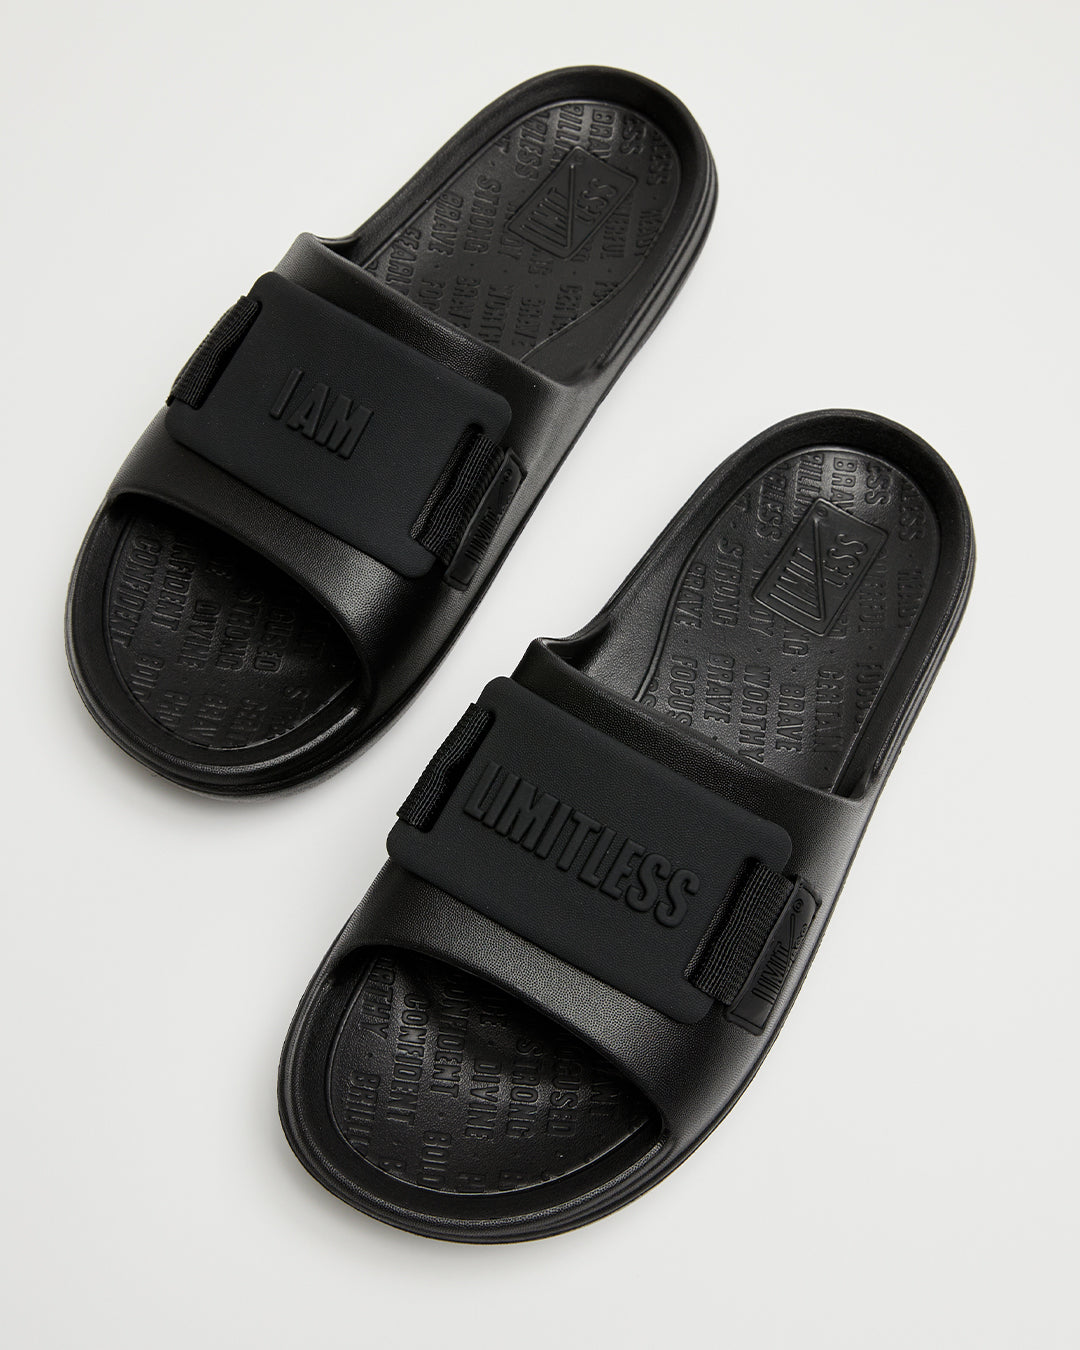 LIMITLESS SLIDES™ WITH ESSENTIAL TIBAH™ QUAD - MATER LAKES ACADEMY EDITION